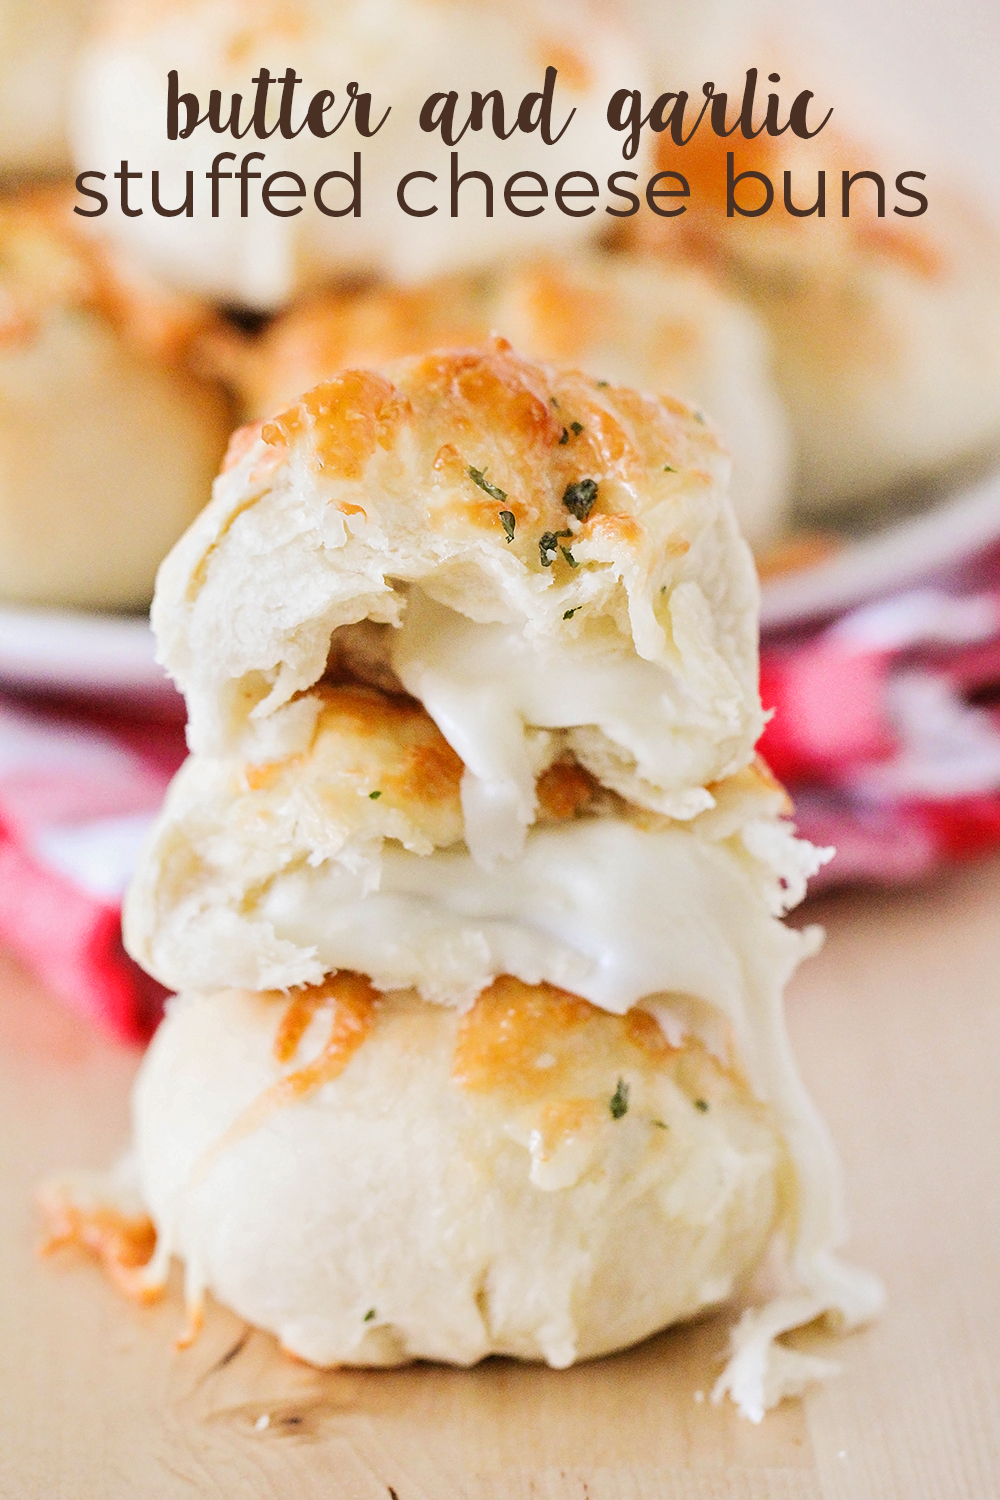 These gooey and melty stuffed cheese buns are amazingly delicious and the perfect side dish or snack!